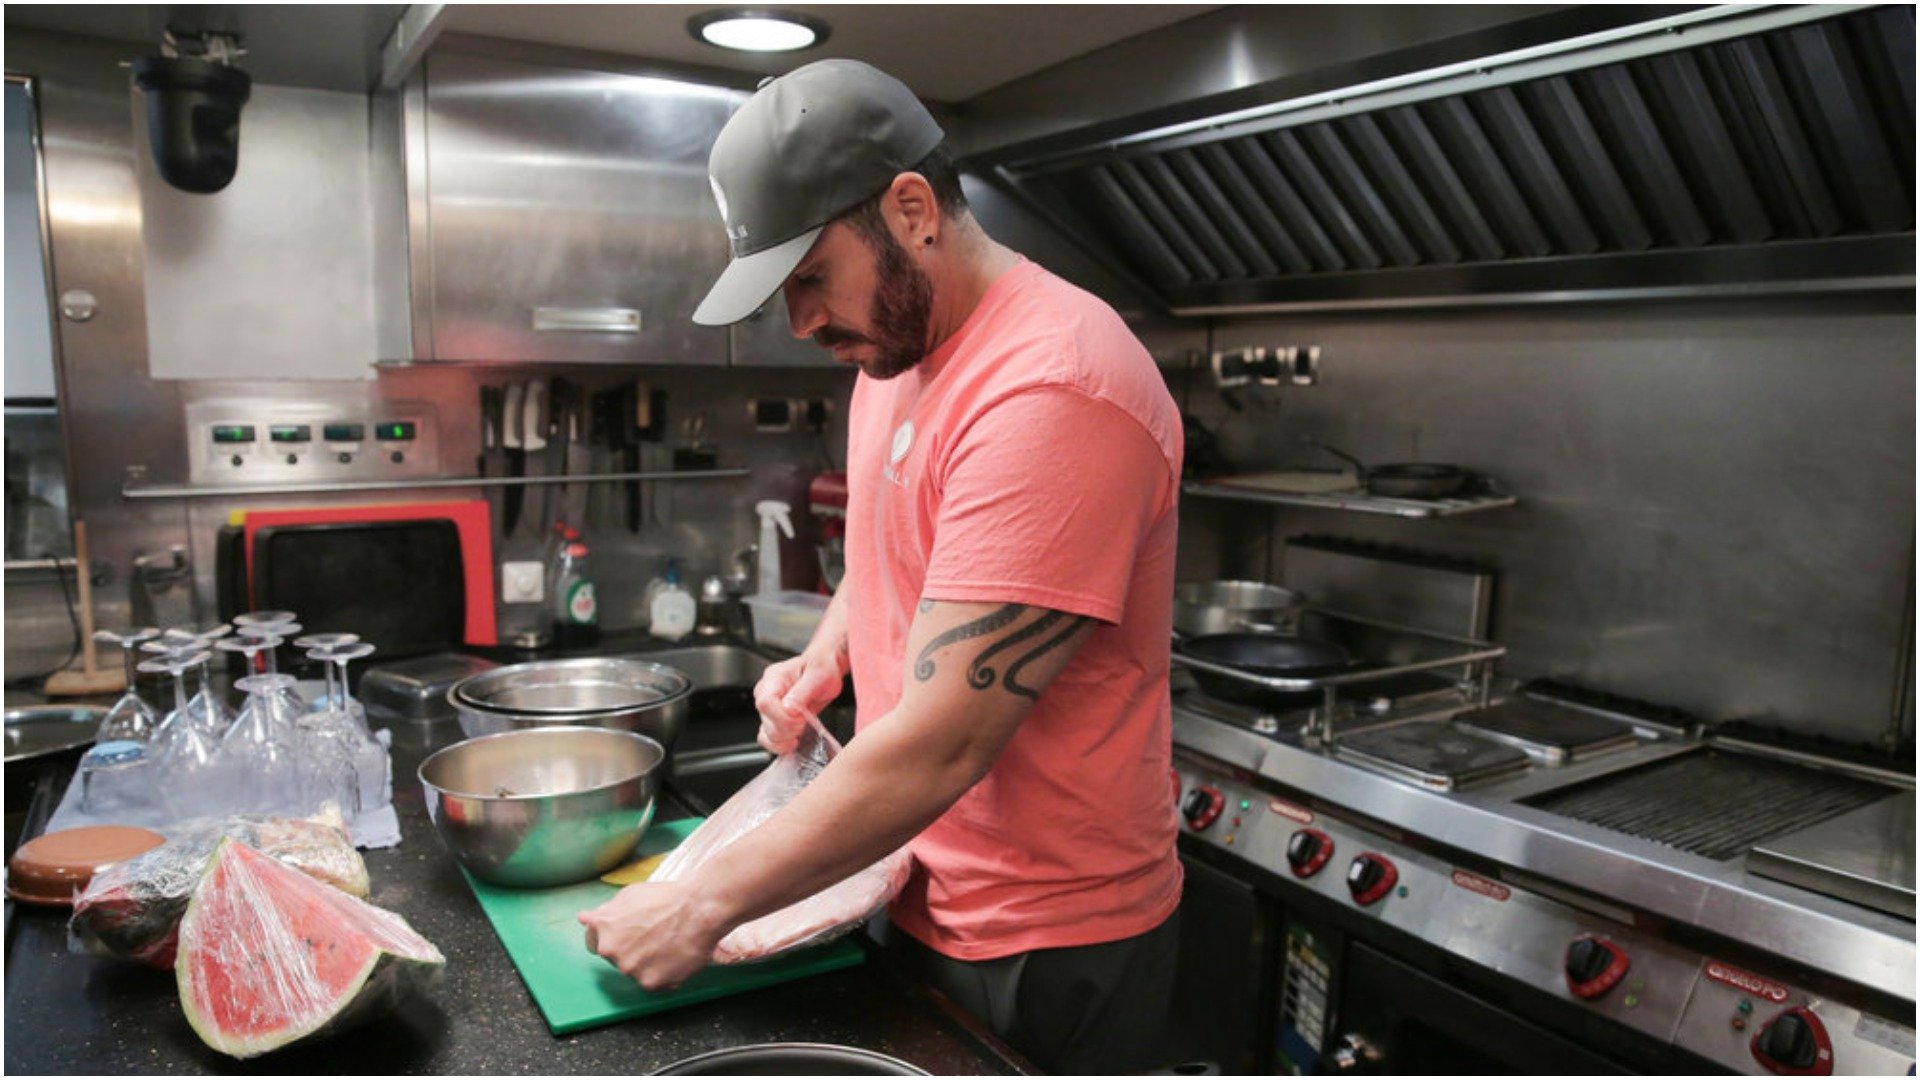 Chef Marcos Spaziani from 'Below Deck Sailing Yacht' prepares a meal in the galley kitchen 